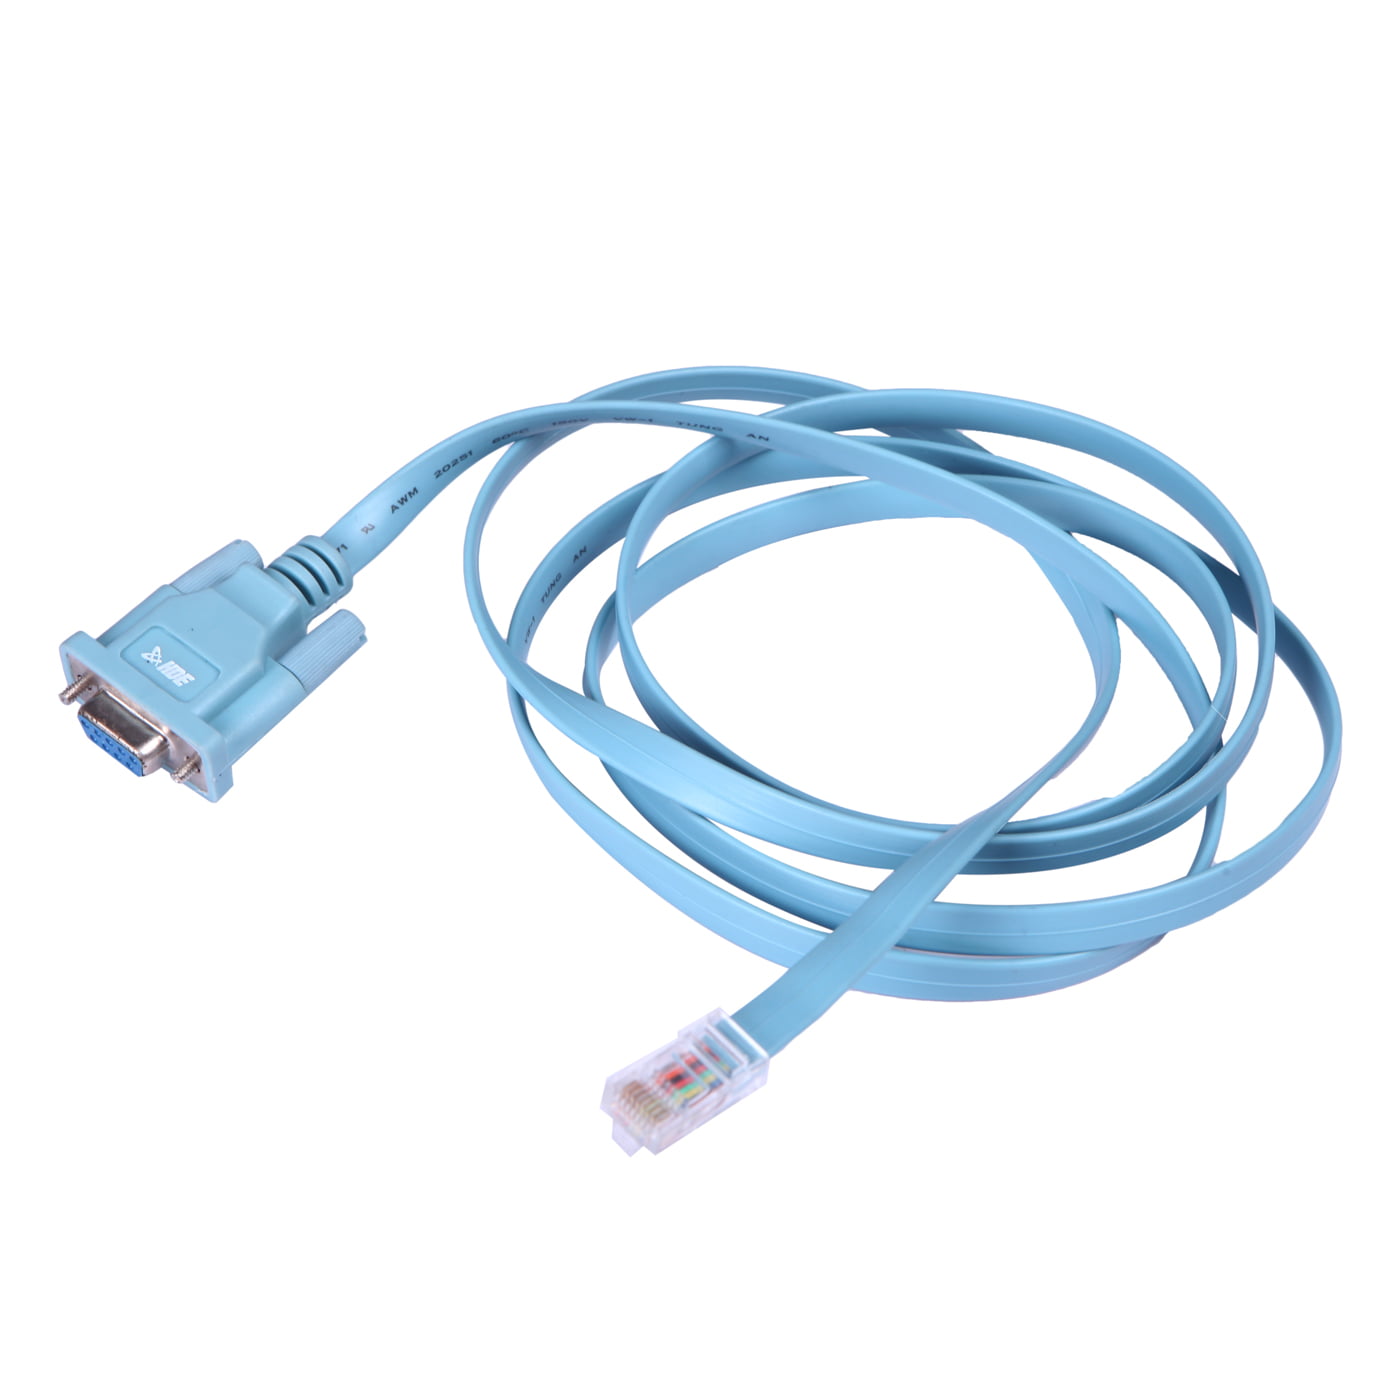 Cat5e RJ45 CAT6 to RS232 DB9 Console Ethernet Cable Adapter for Router Network Lysee Data Cables 